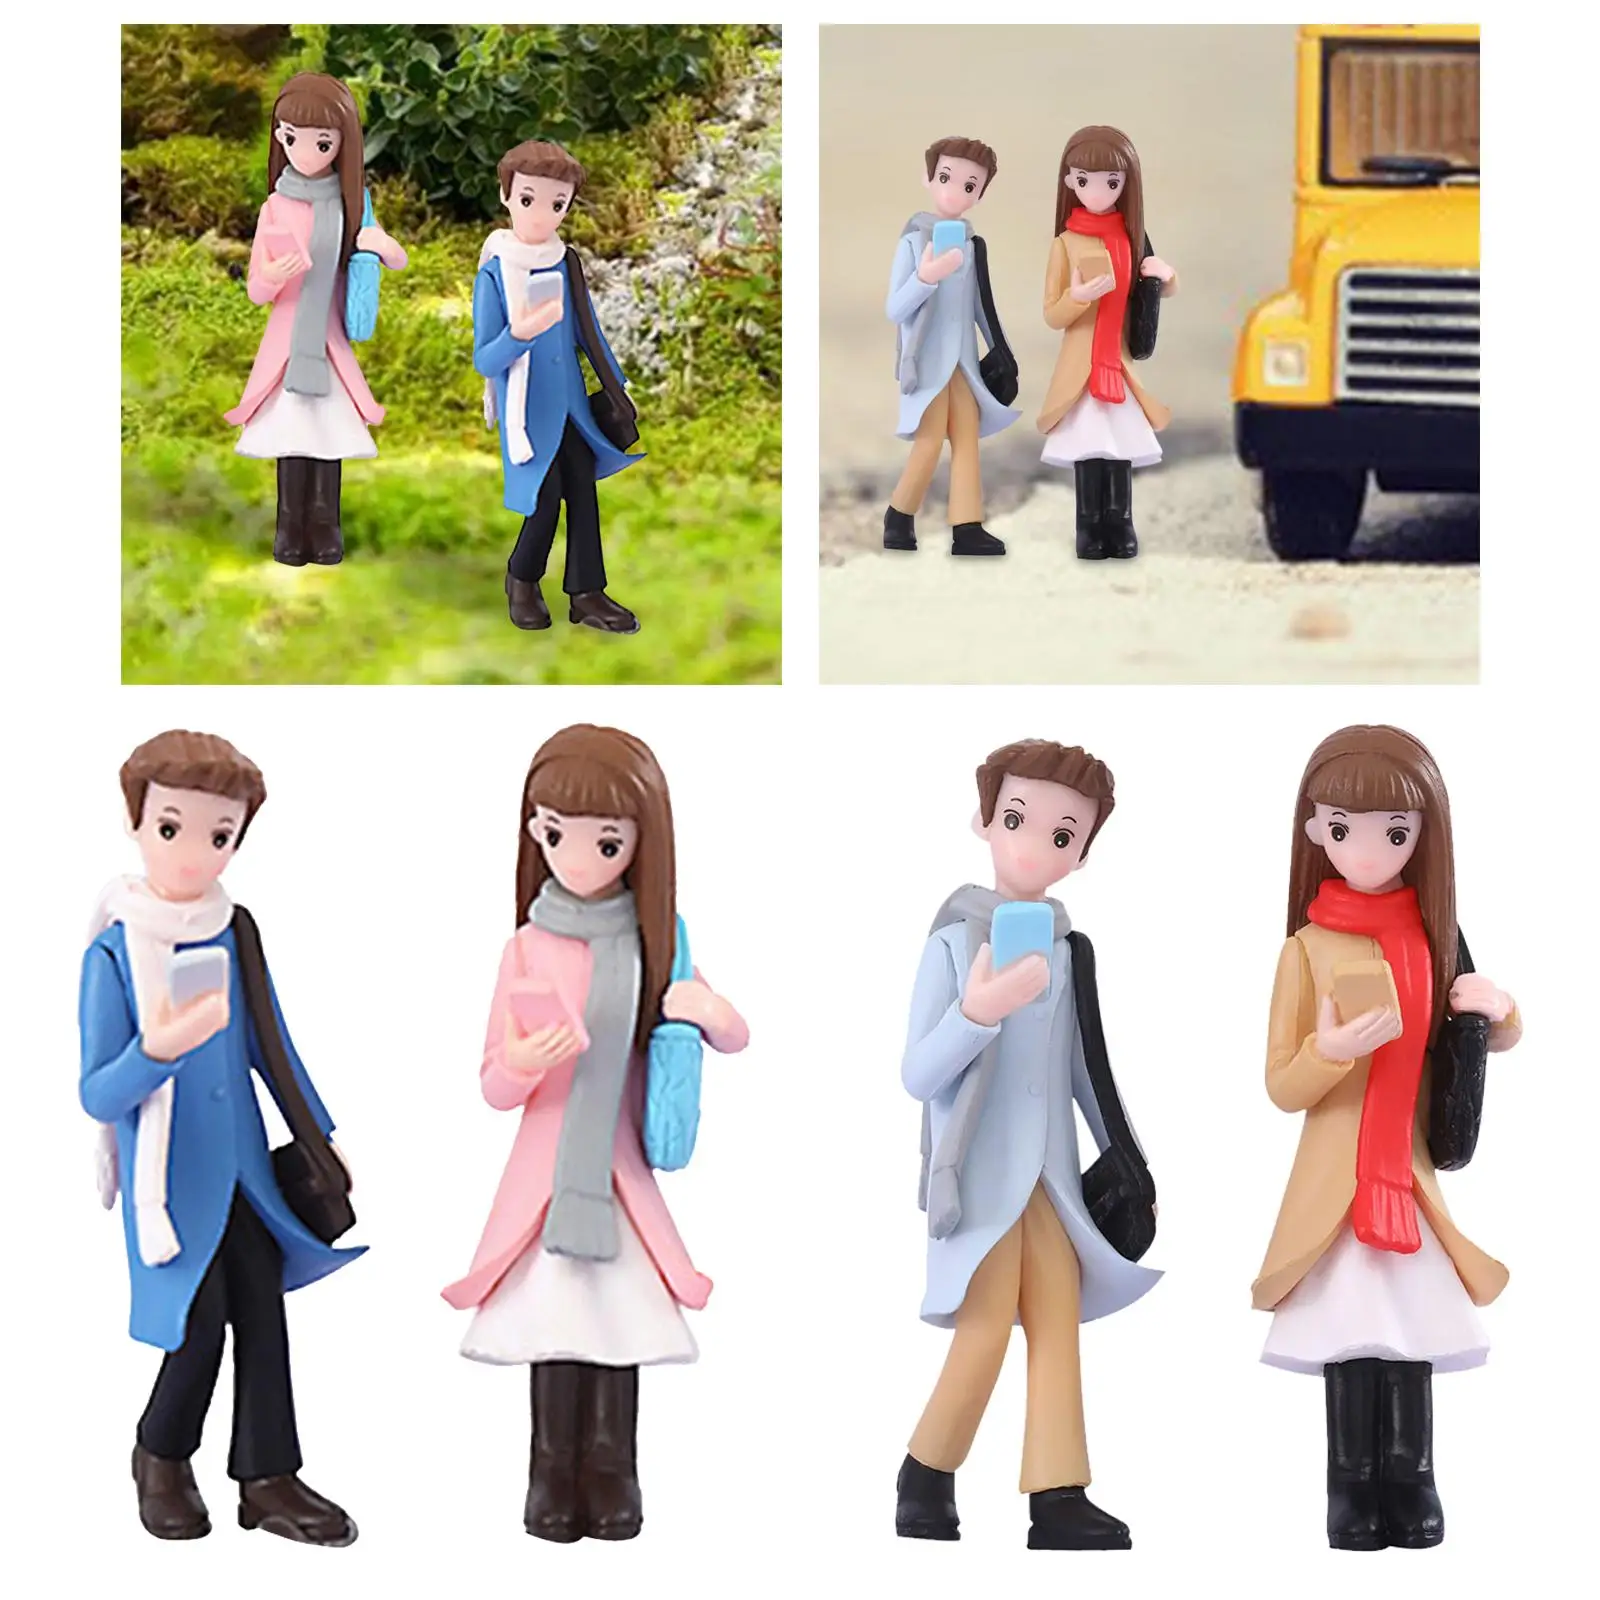 Phone Couple Collection Miniature Diorama Street Character Figure Sand Table Ornament for Diorama DIY Scene Dollhouse Decoration